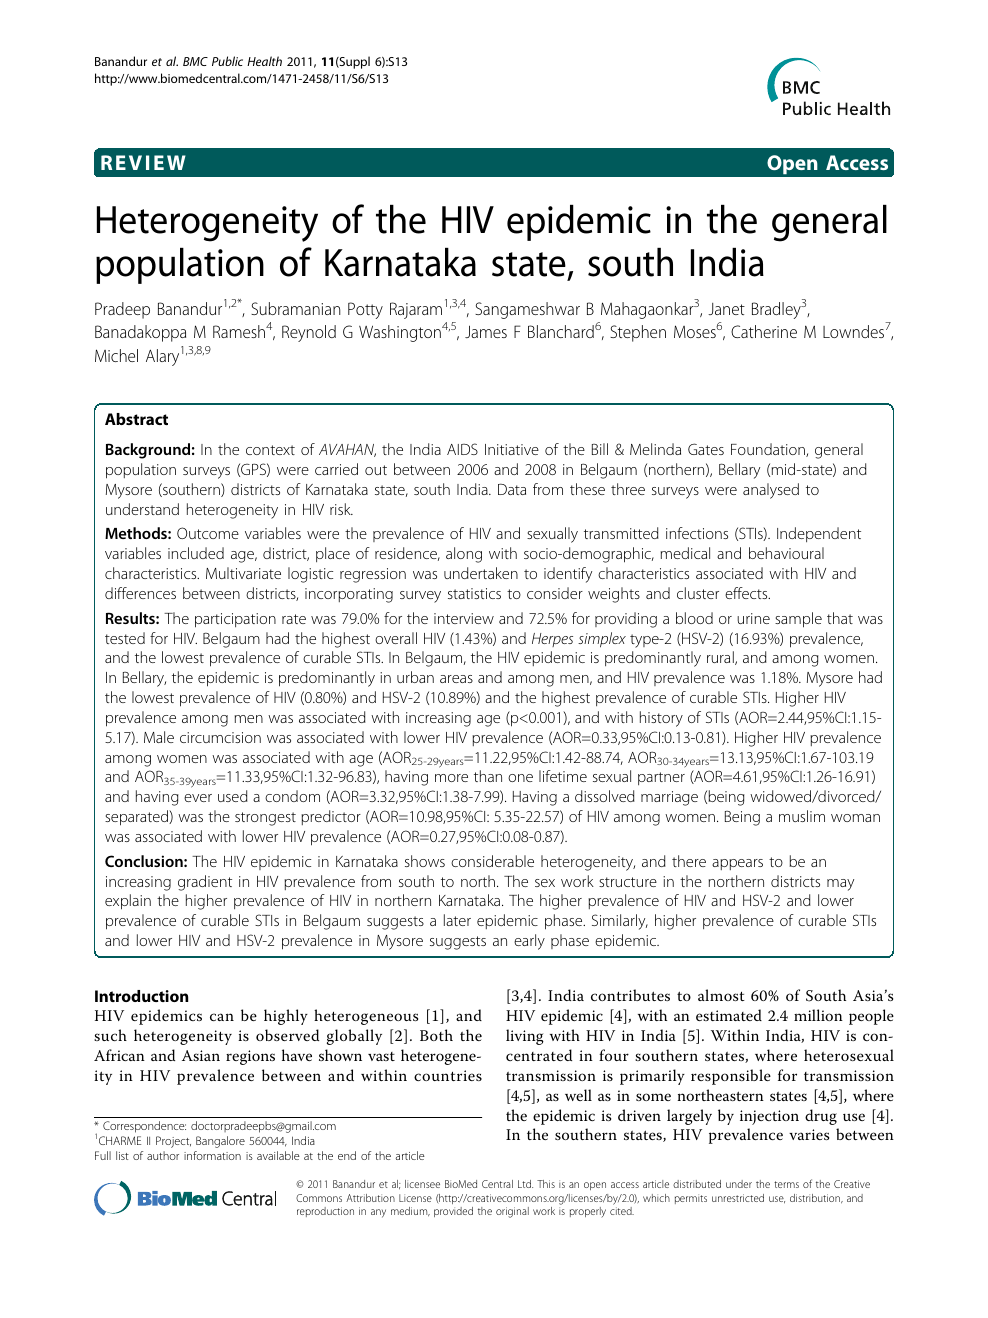 Heterogeneity of the HIV epidemic in the general population of Karnataka state, south India